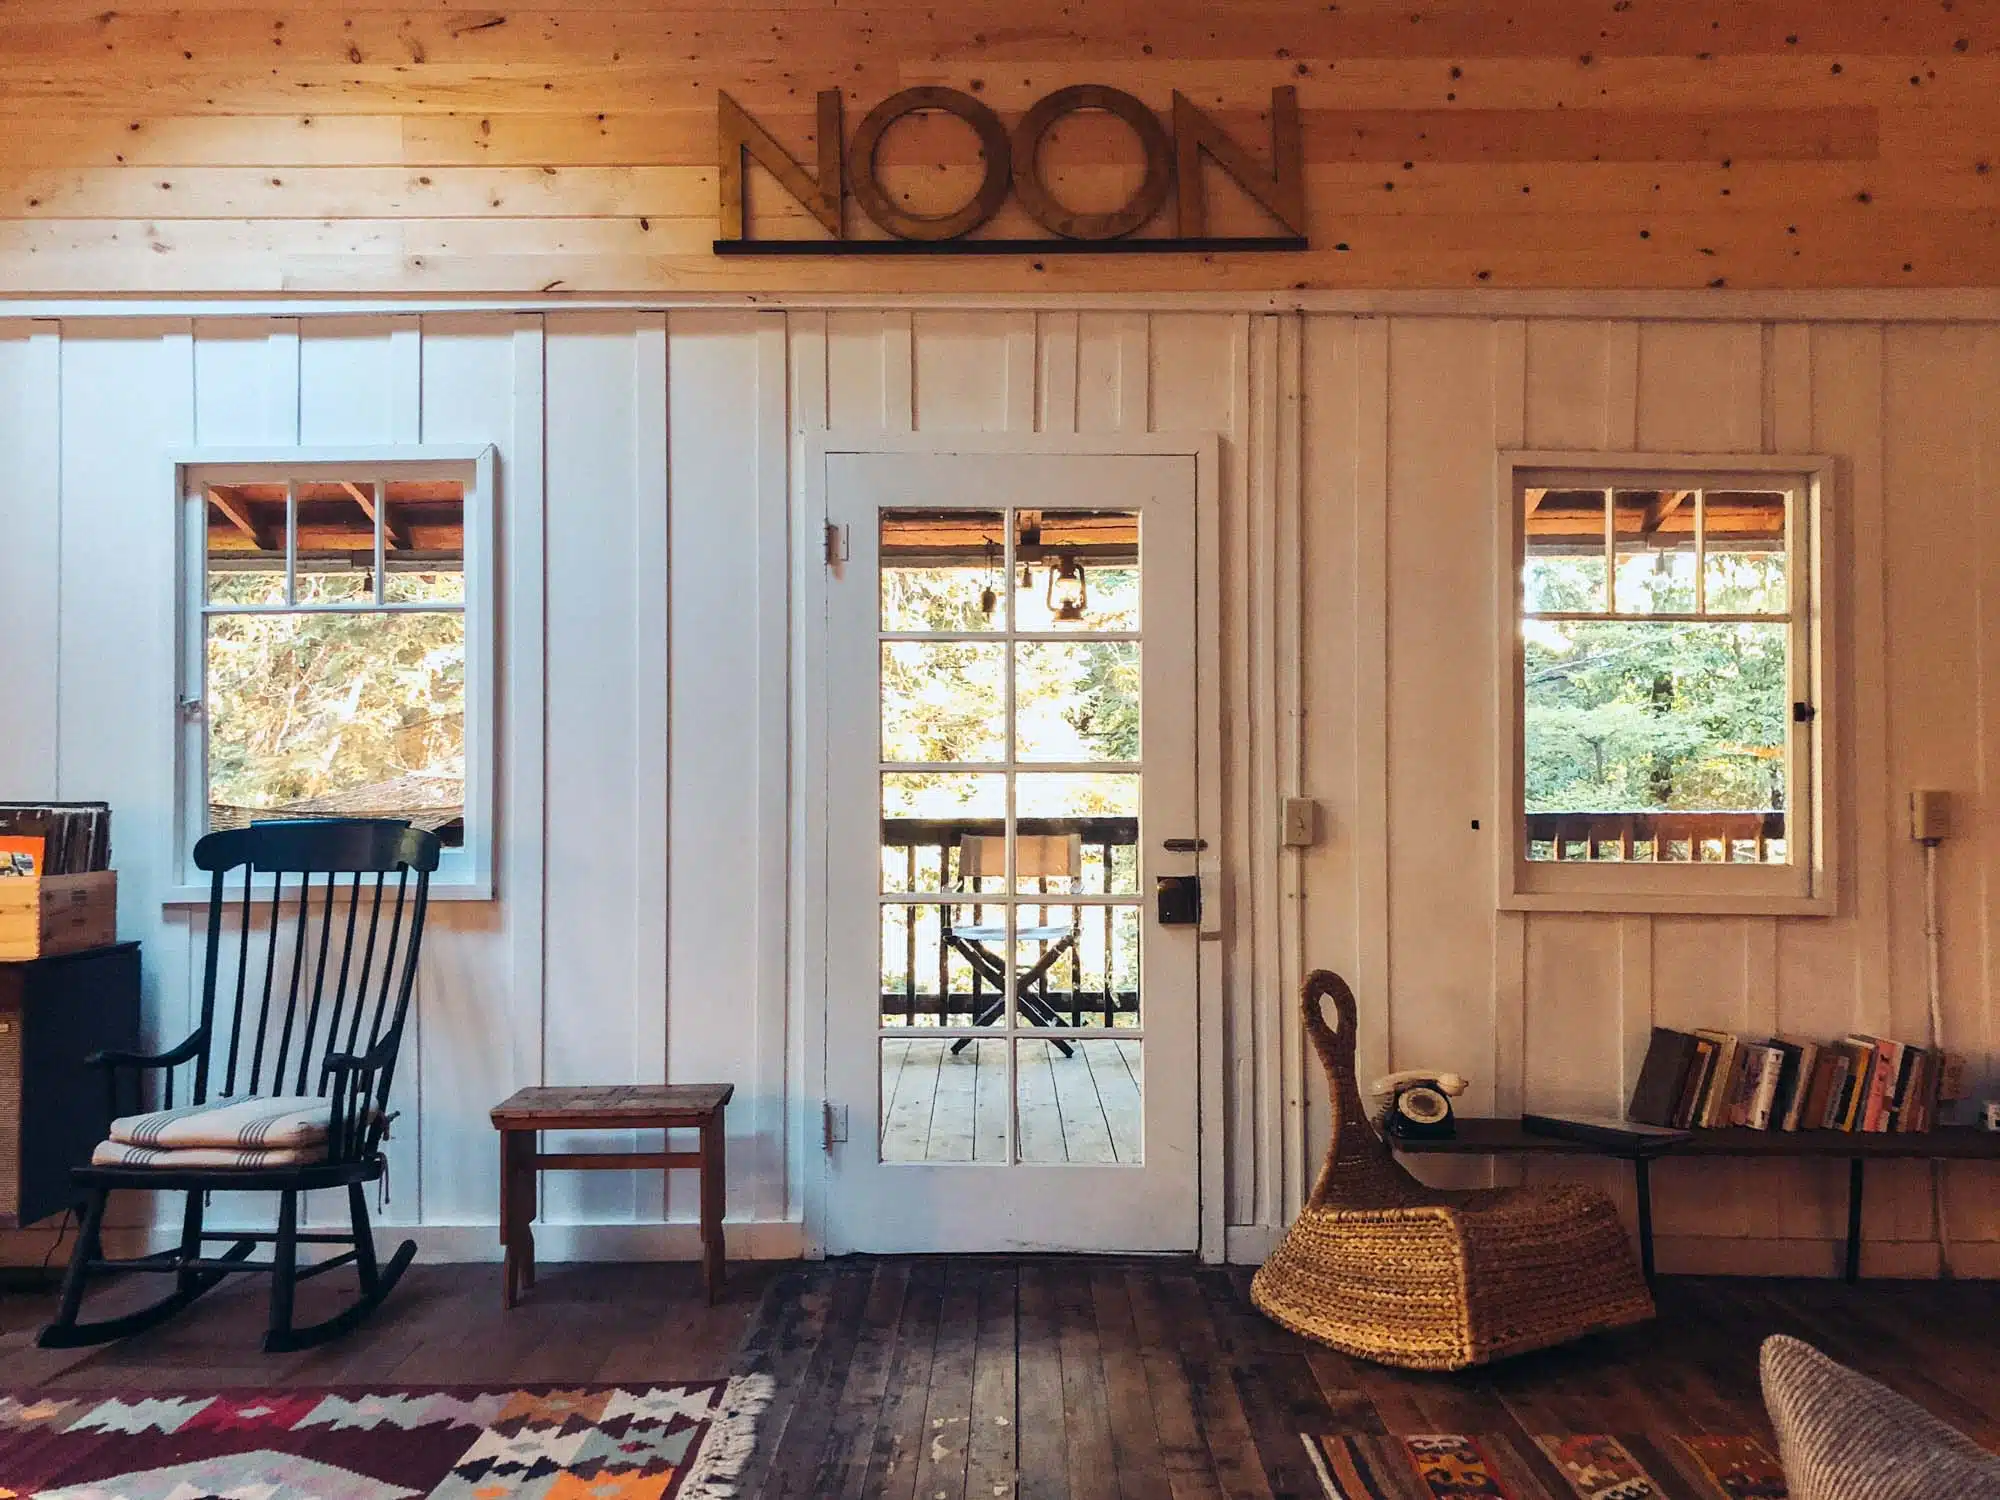 Camp Noon - Places to stay in Sonoma County